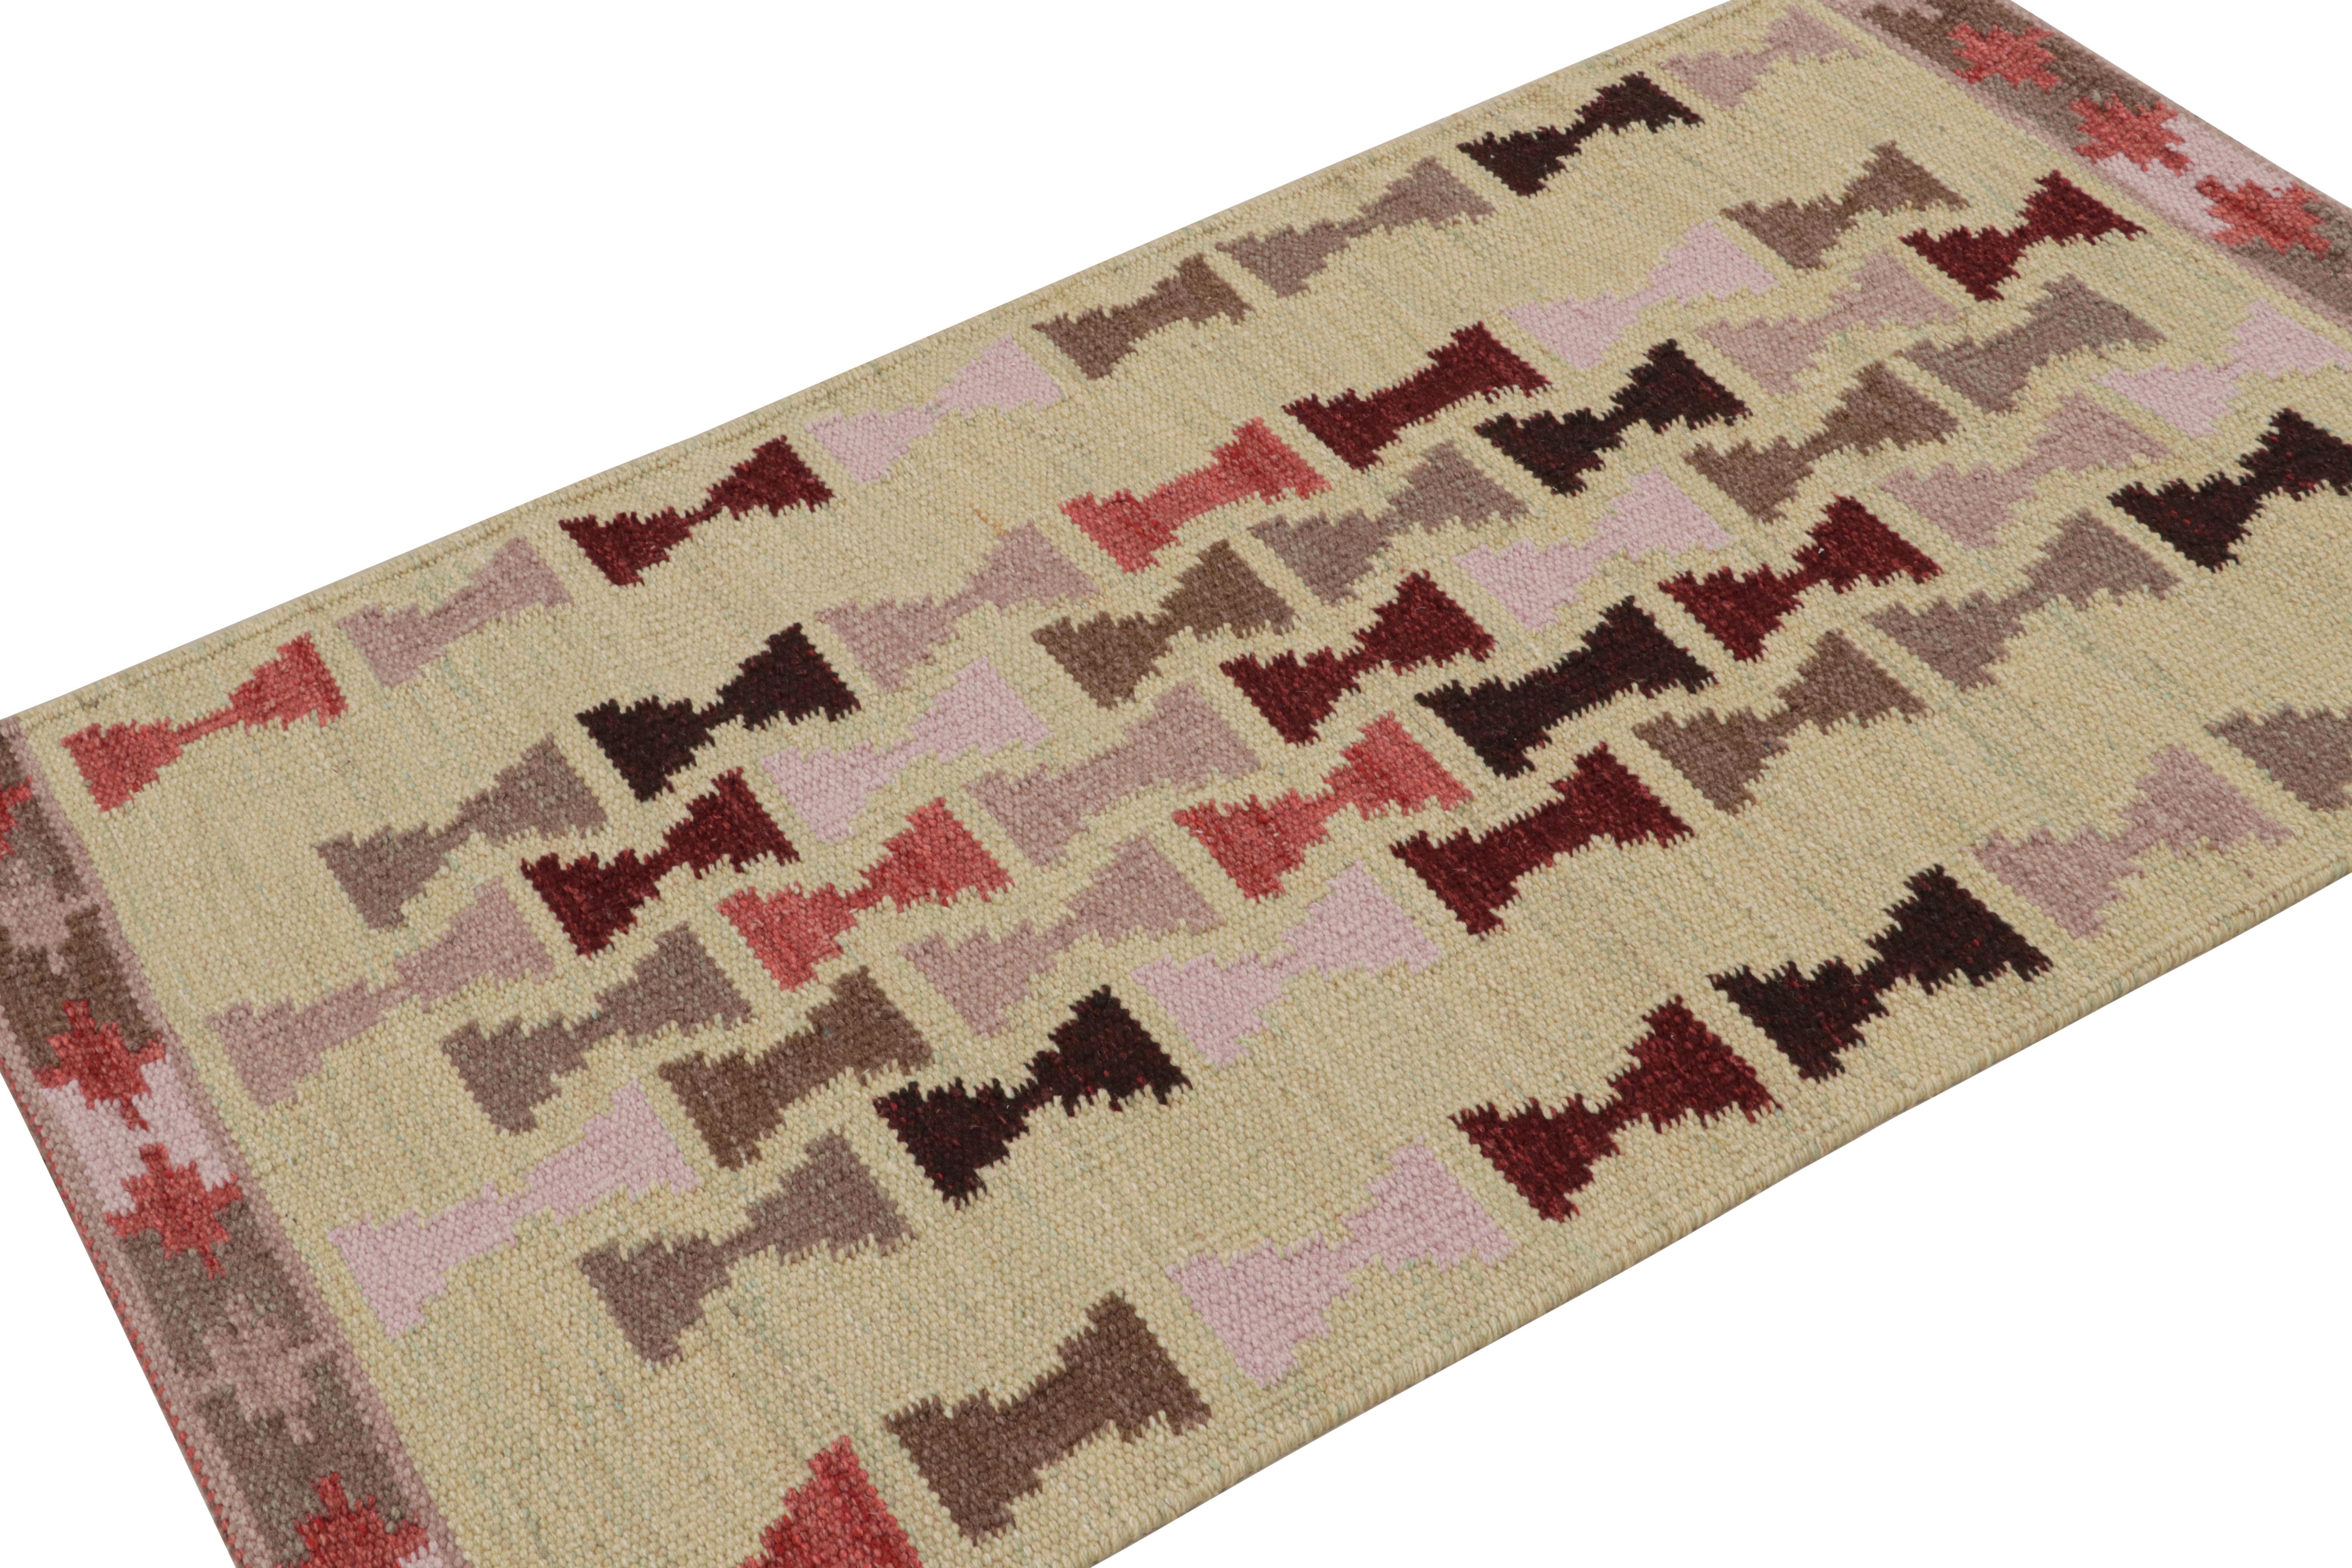 Handwoven in wool,a 3x5 Swedish accent rug from Rug & Kilim’s Scandinavian rug collection.

On the Design

In this design, cream underscores the geometric patterns inspired by hourglasses in the Swedish minimalist style. Keen eyes will admire